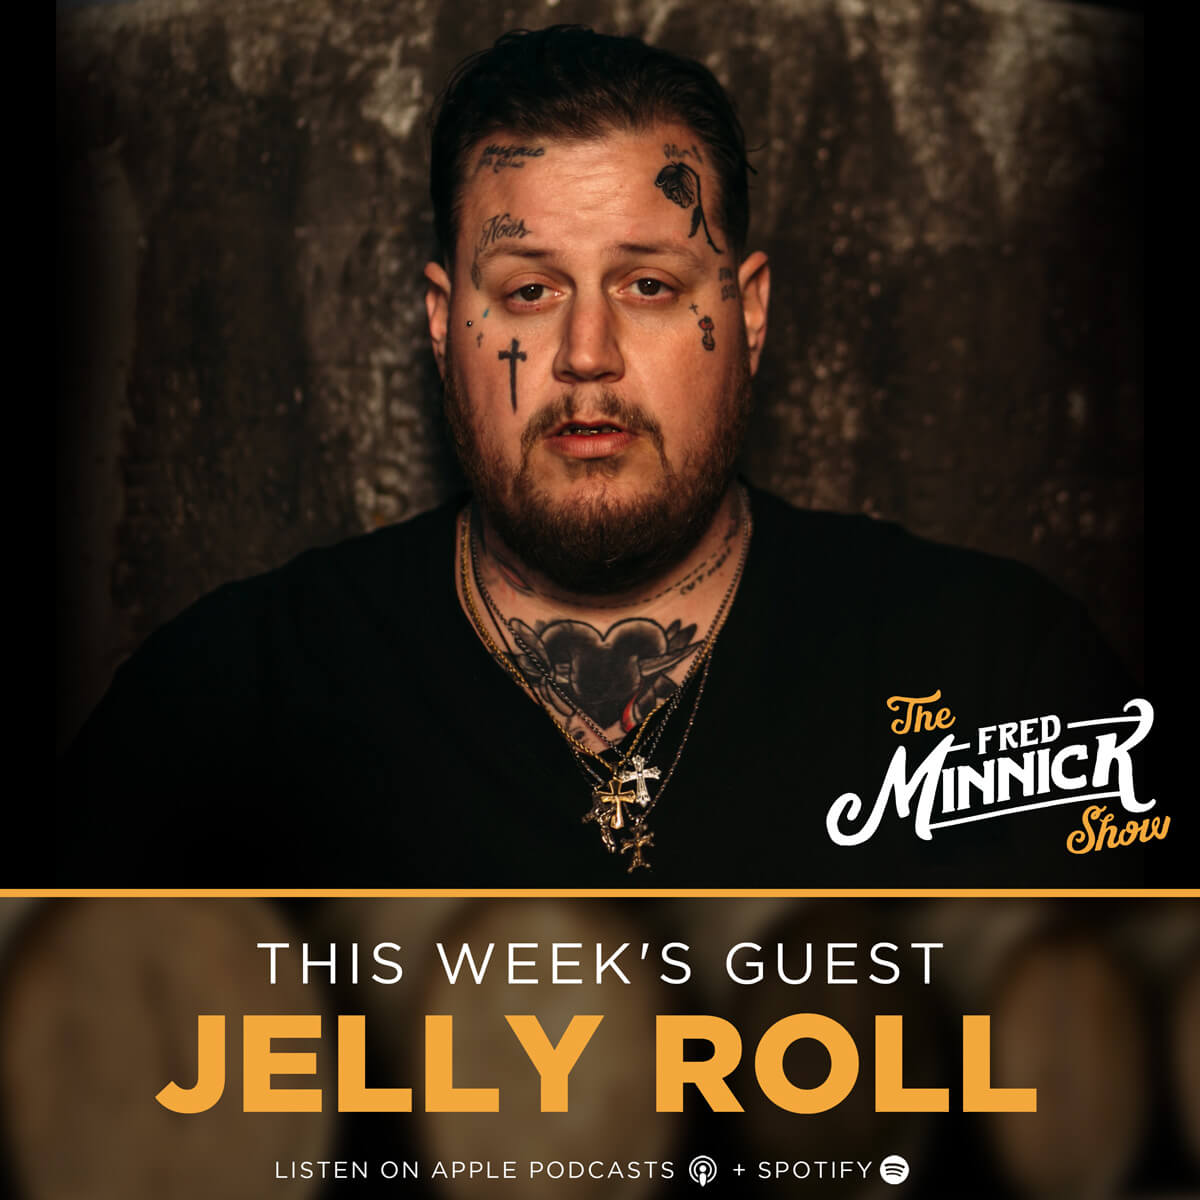 tour dates for jelly roll